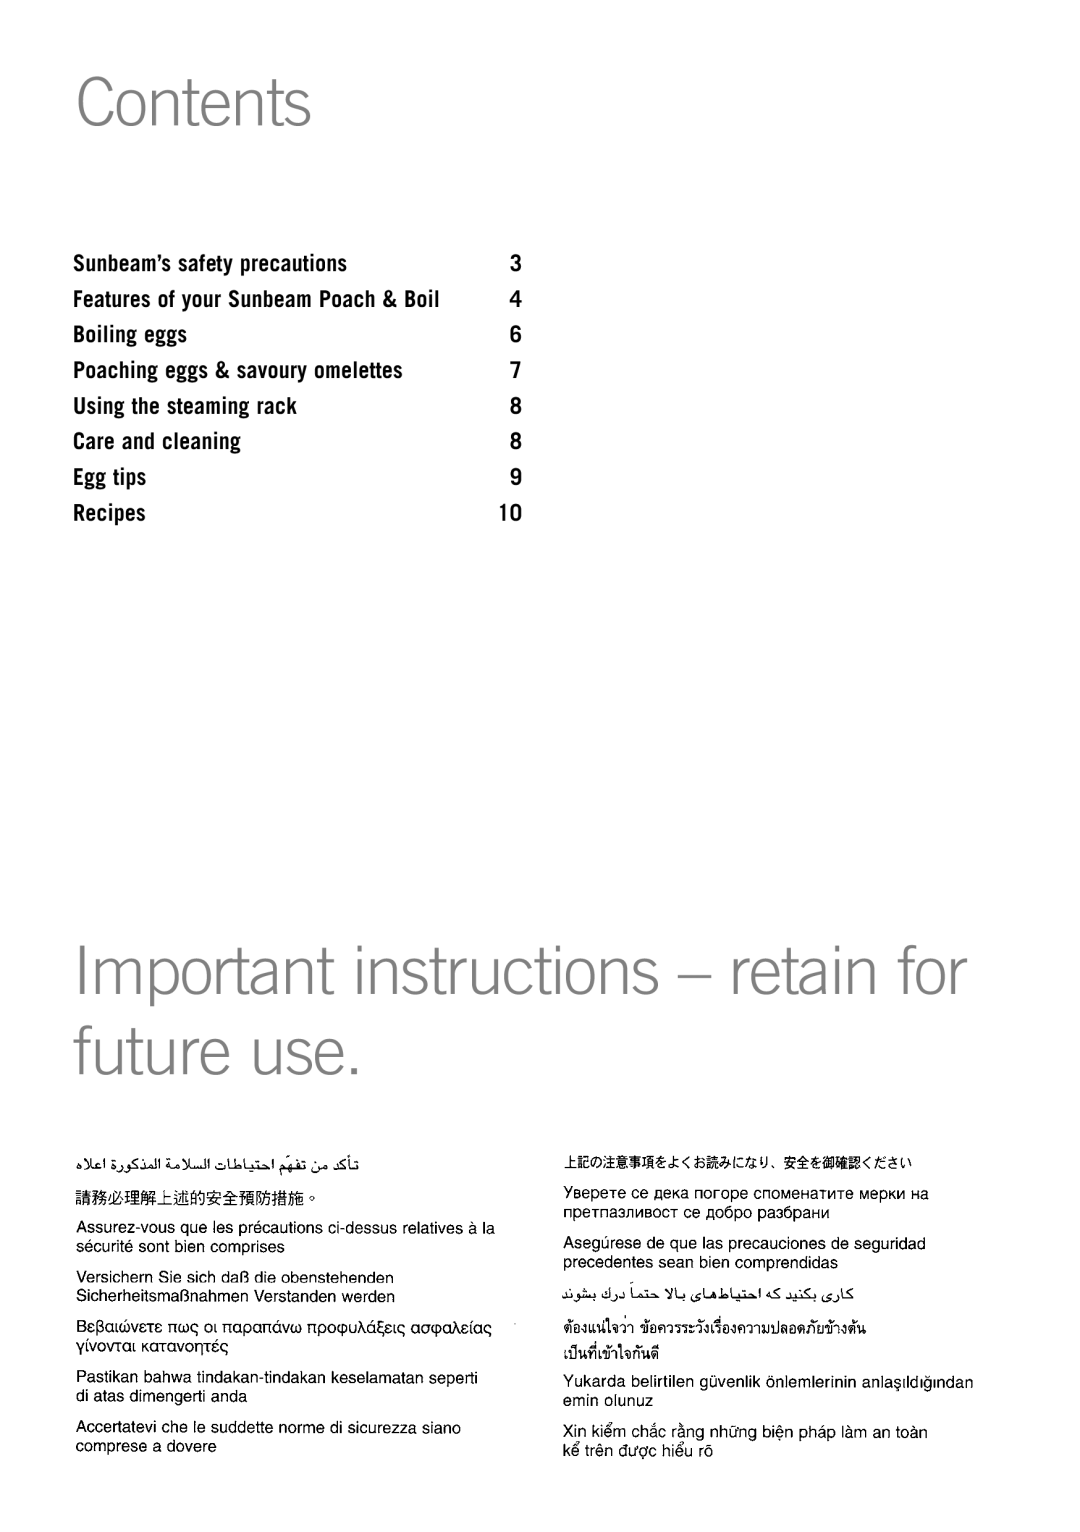 Sunbeam EC1300 manual Contents, Important instructions - retain for future use, Sunbeam’s safety precautions, Boiling eggs 